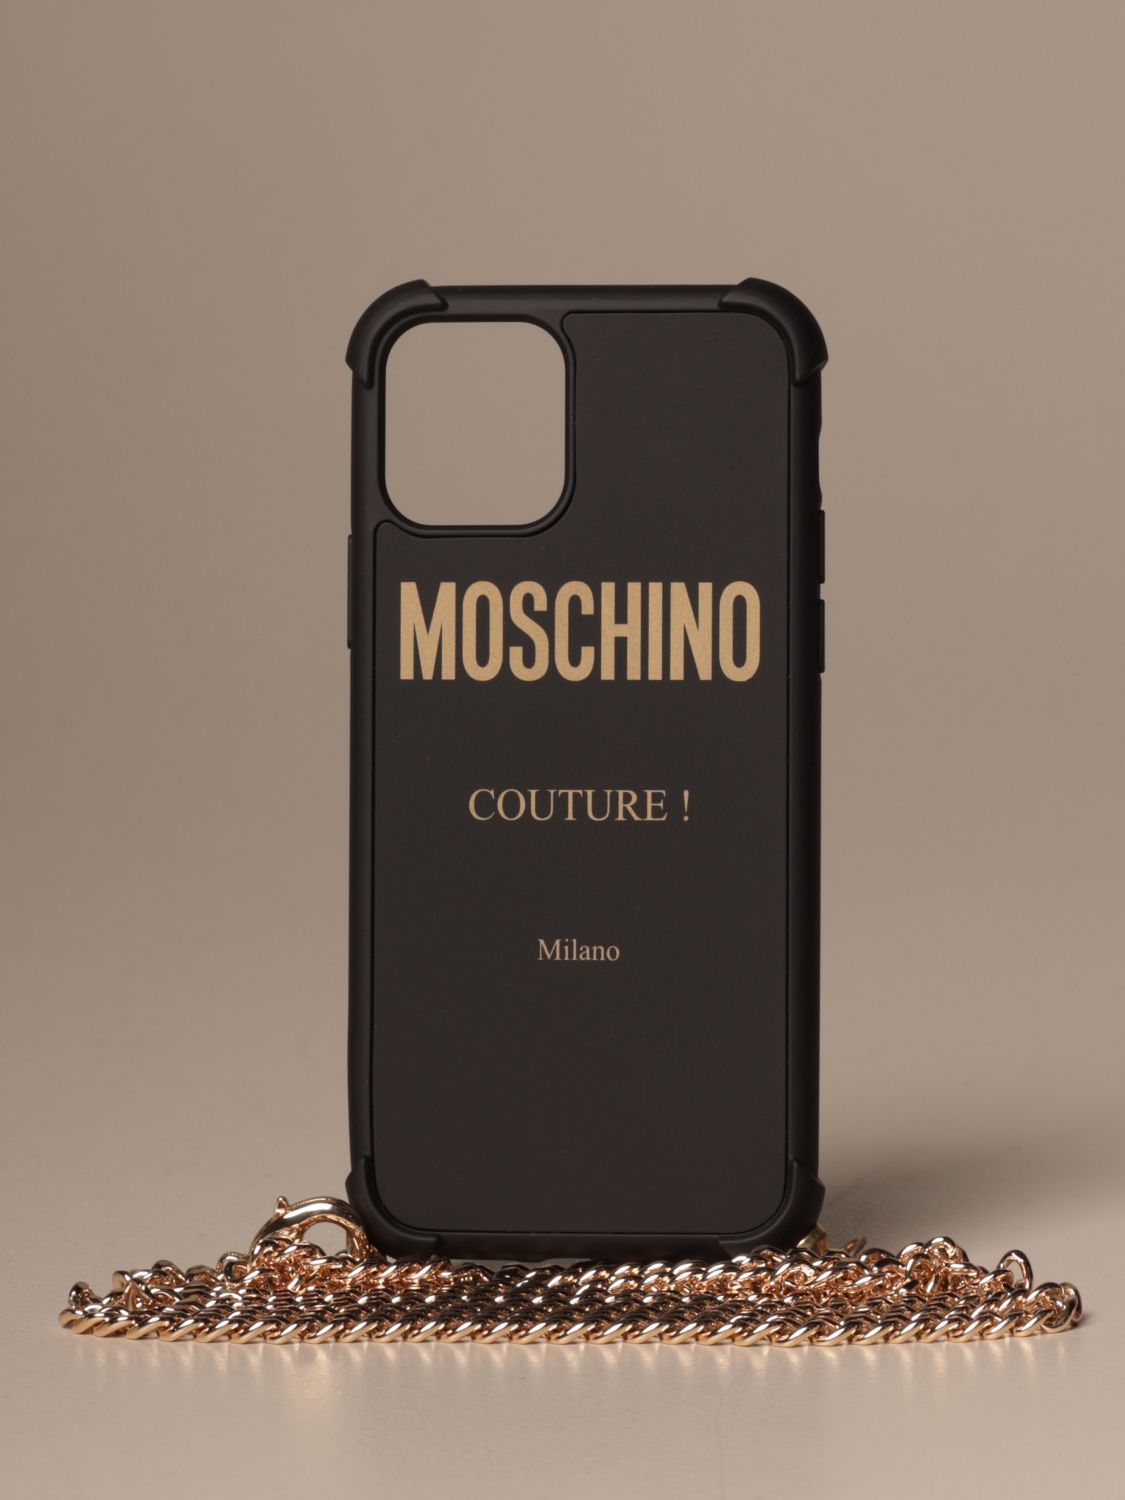 Moschino Couture Iphone 11 Pro Cover Case Moschino Couture Women Black Case Moschino Couture 7942 04 Giglio Com